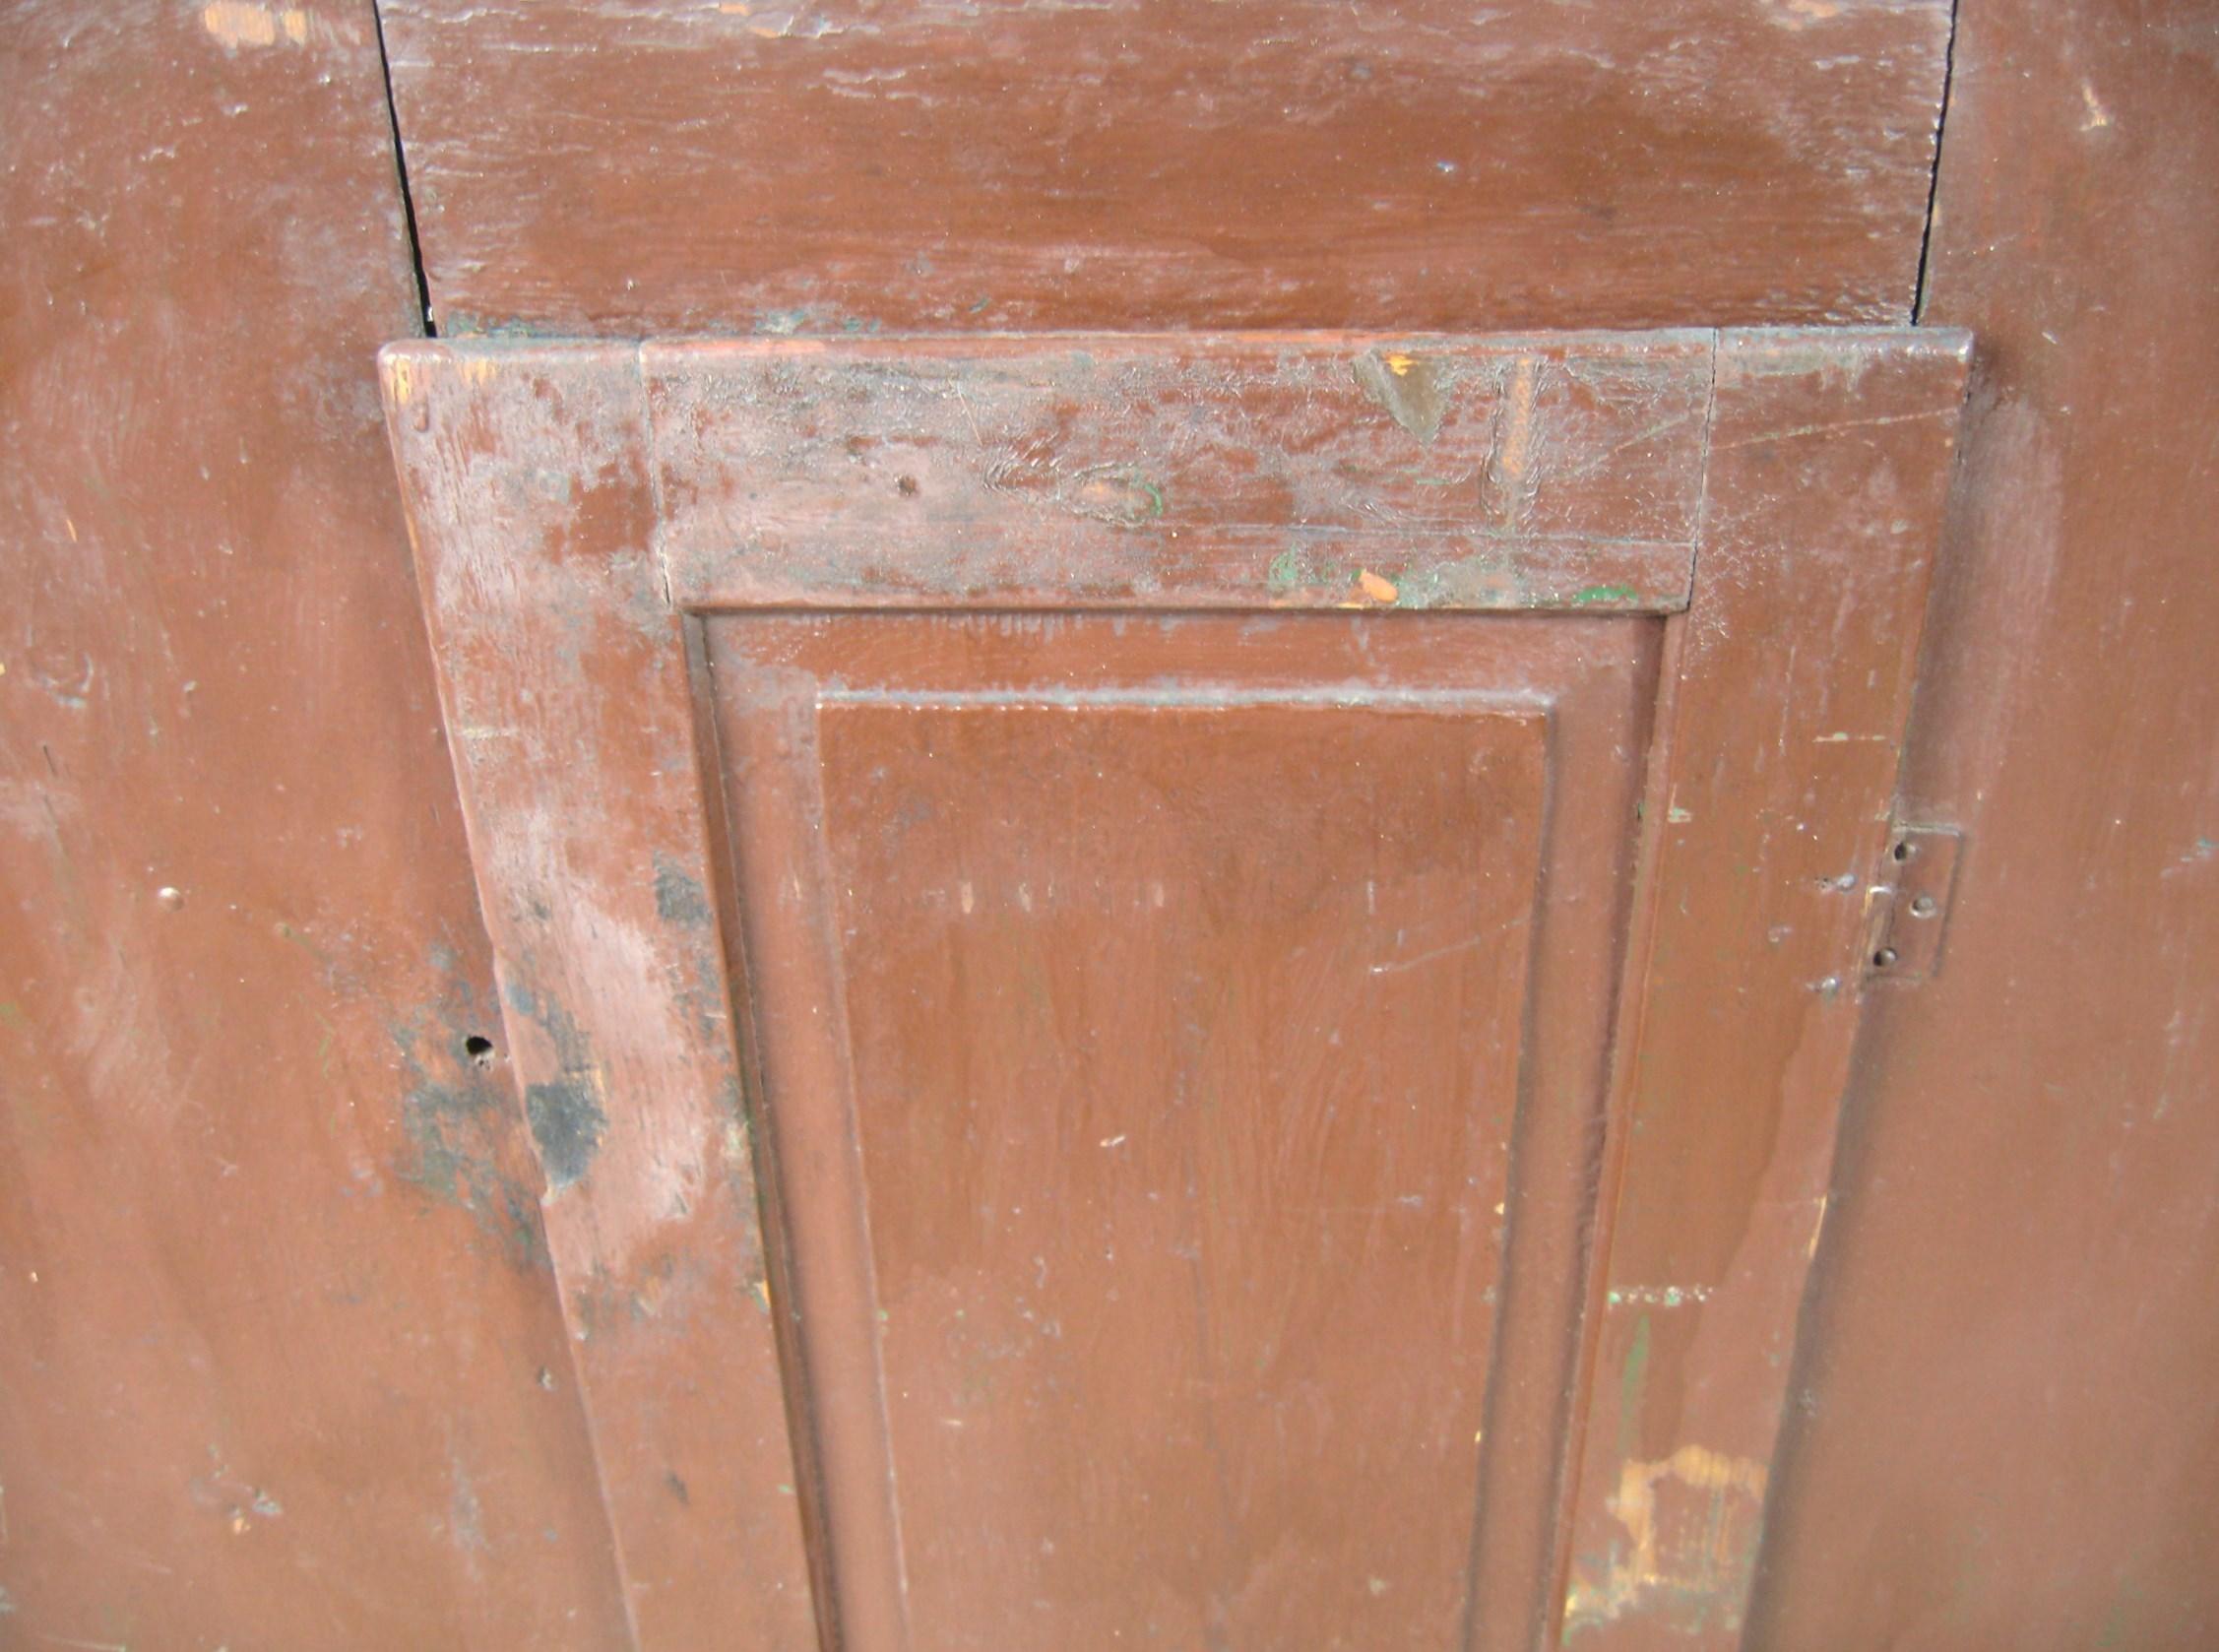 This authentic Fabulous Primitive Blind door painted 1850s Dovetailed cupboard in Brownish / Red, it has many layers of paint which are worn through in many spots to reveal the original color. This is a rare find for collectors and enthusiasts of